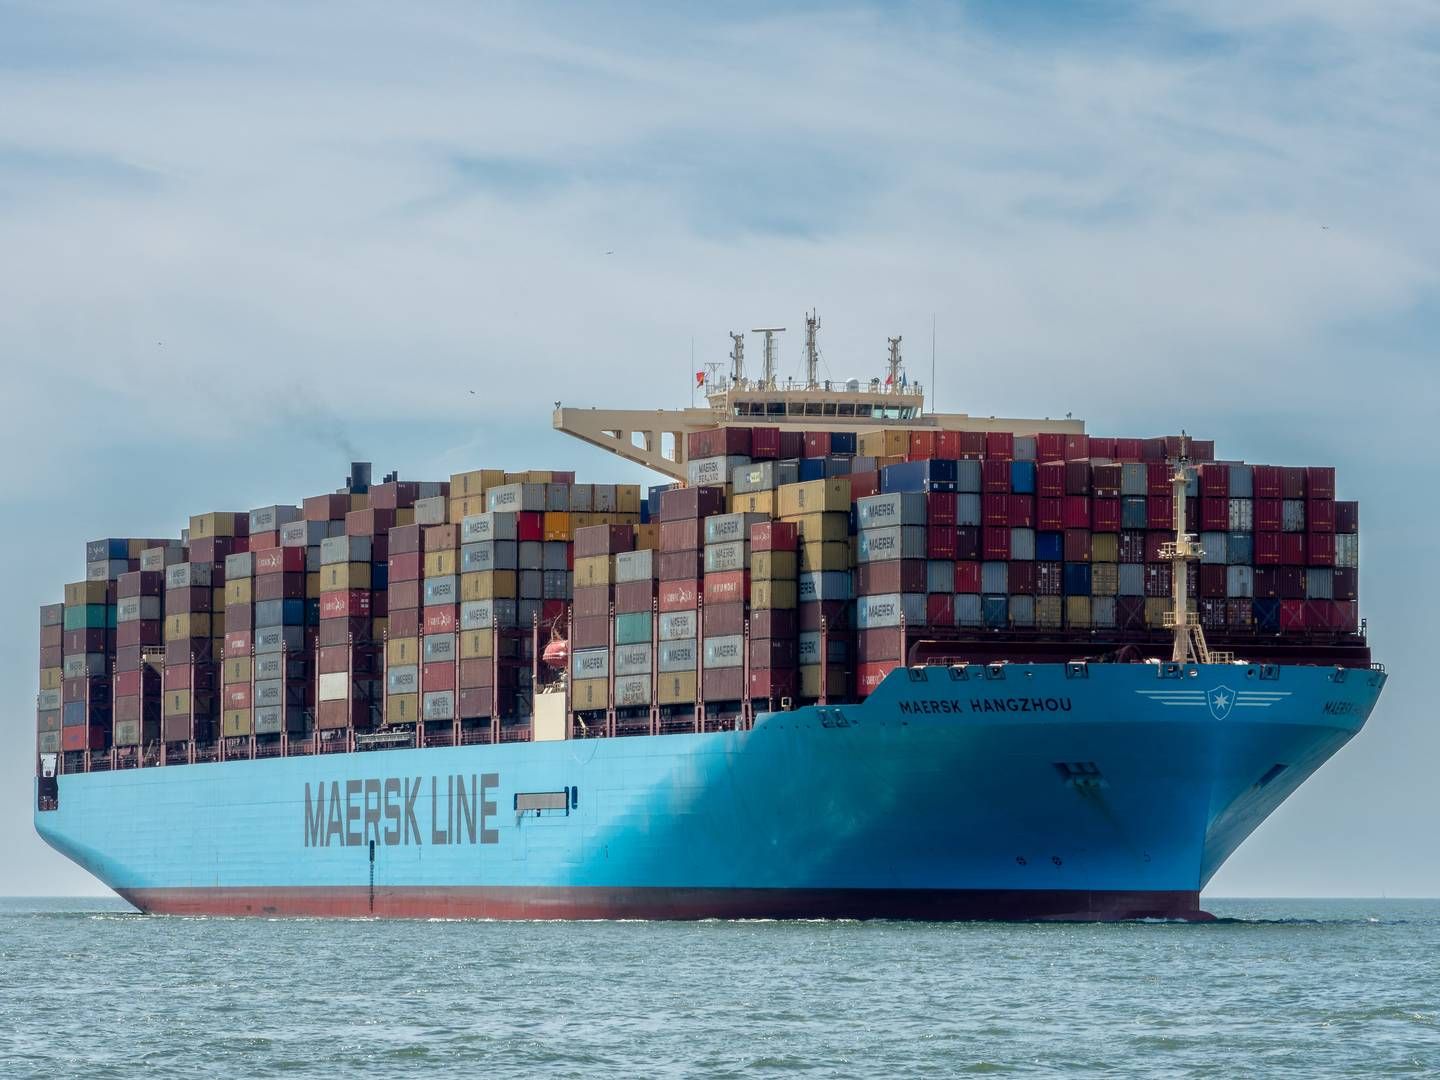 Overall, the recent attacks by the Houthi militia have affected 145 of Maersk's ships. However, a number of other shipping companies have also diverted. | Photo: Rene Van Quekelberghe/Reuters/Ritzau Scanpix